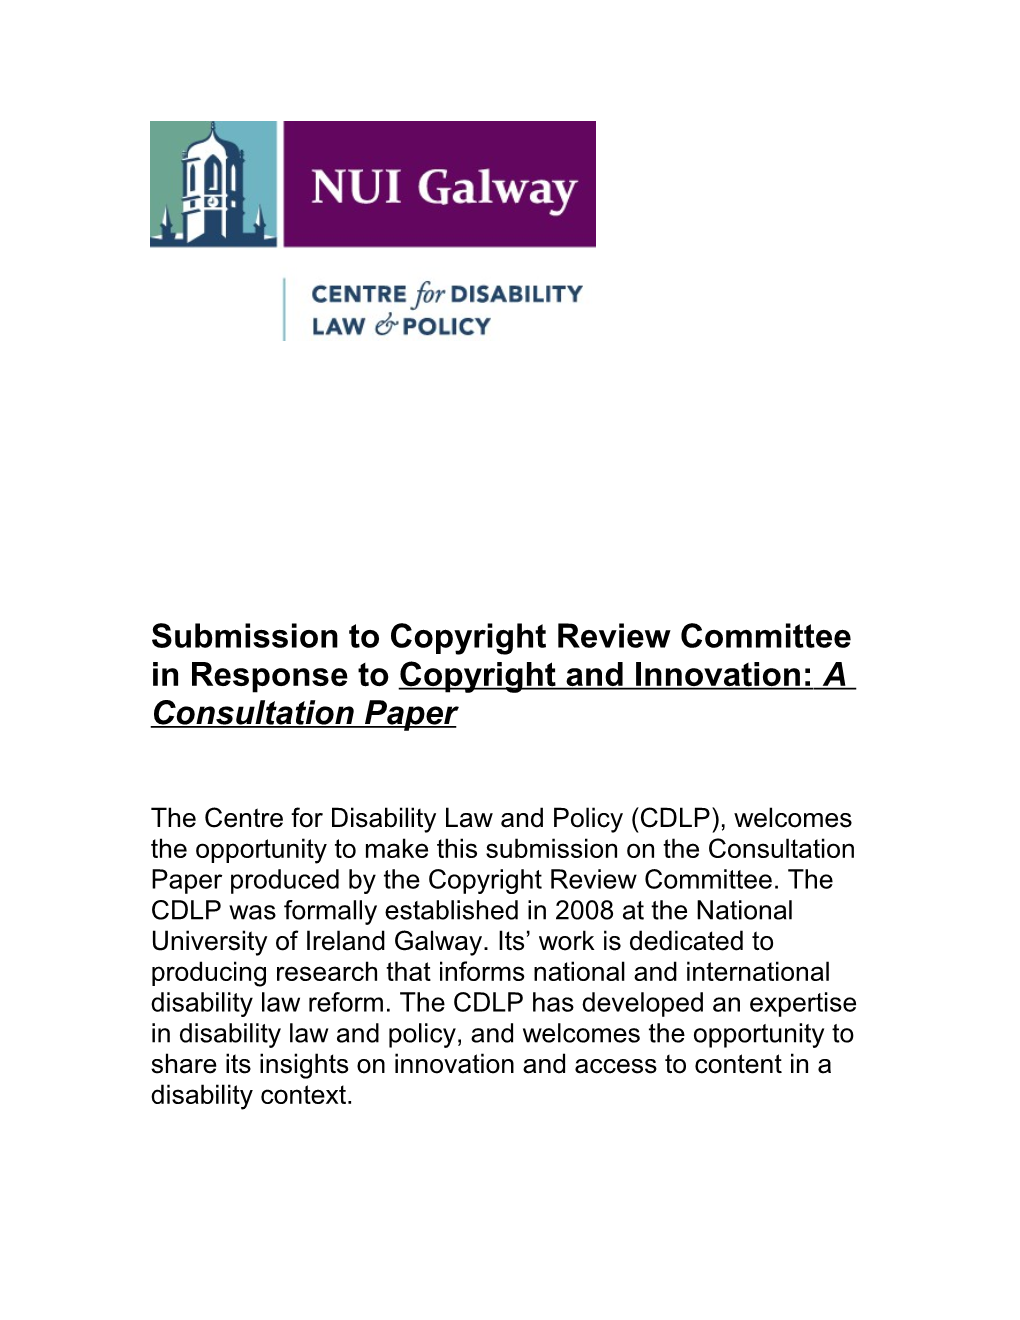 Submission to Copyright Review Committee in Response to Copyright and Innovation: A